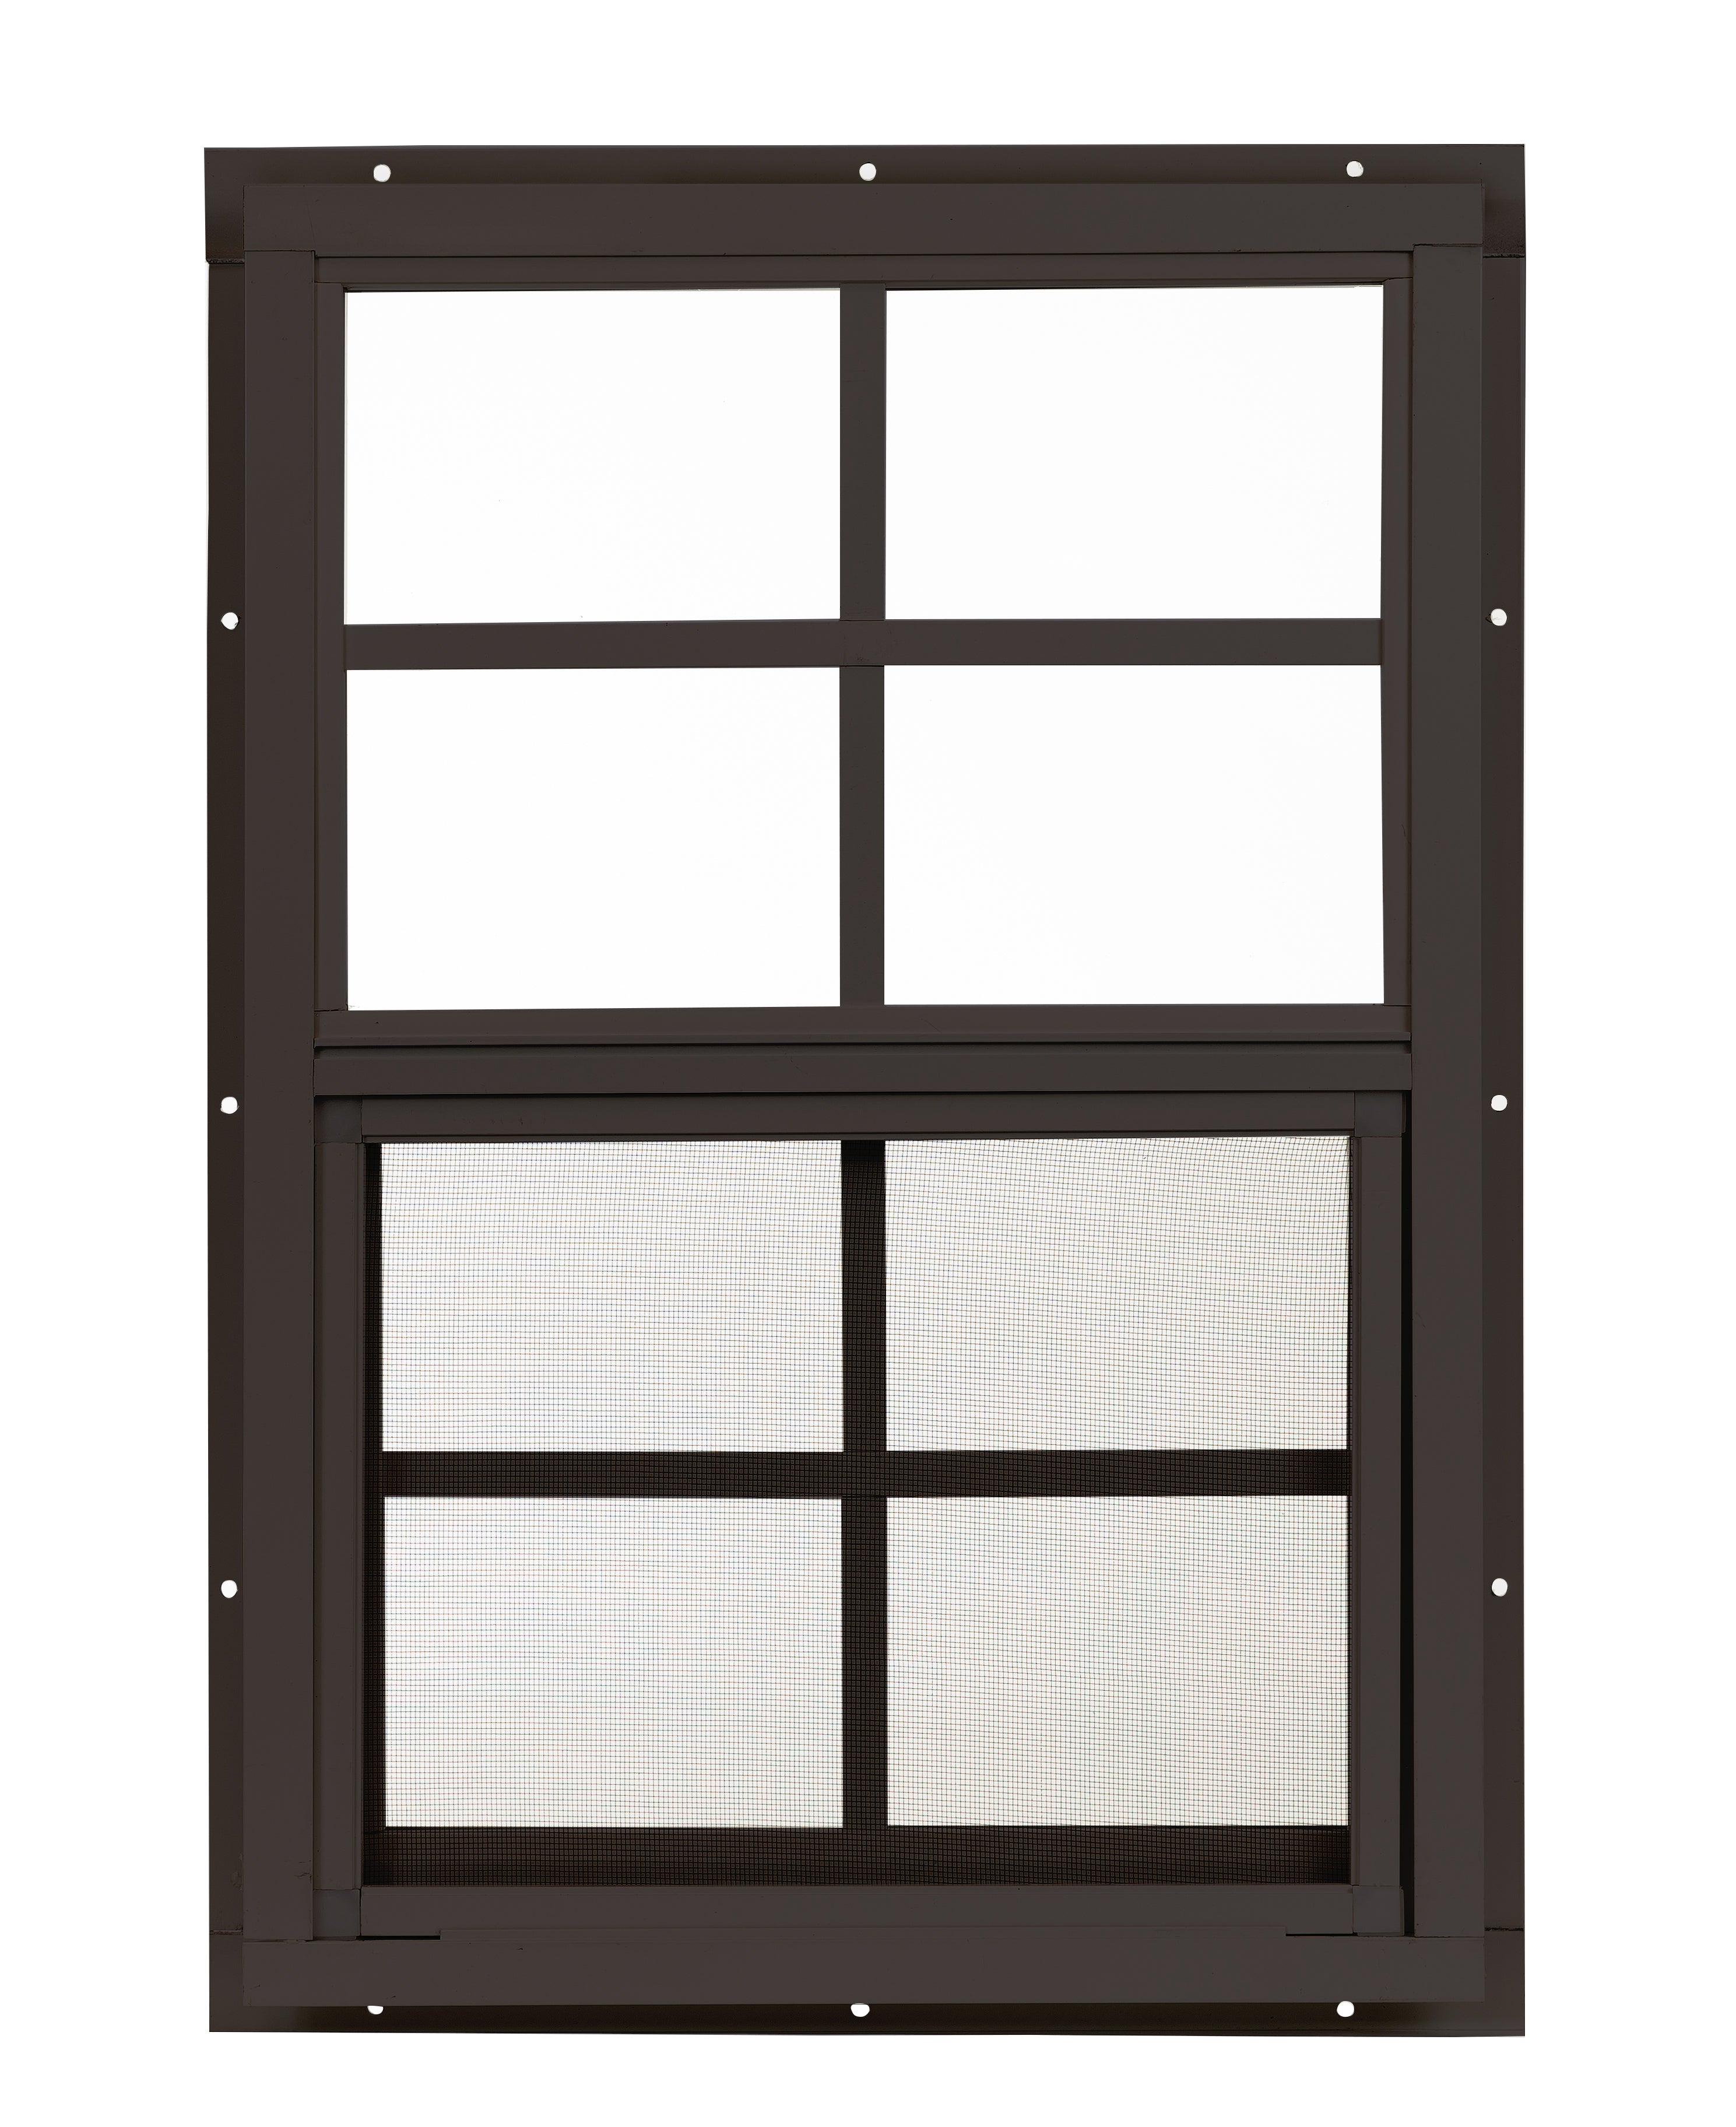 14" W x 21" H Single Hung J-Lap Mount Brown Window for Sheds, Playhouses, and MORE